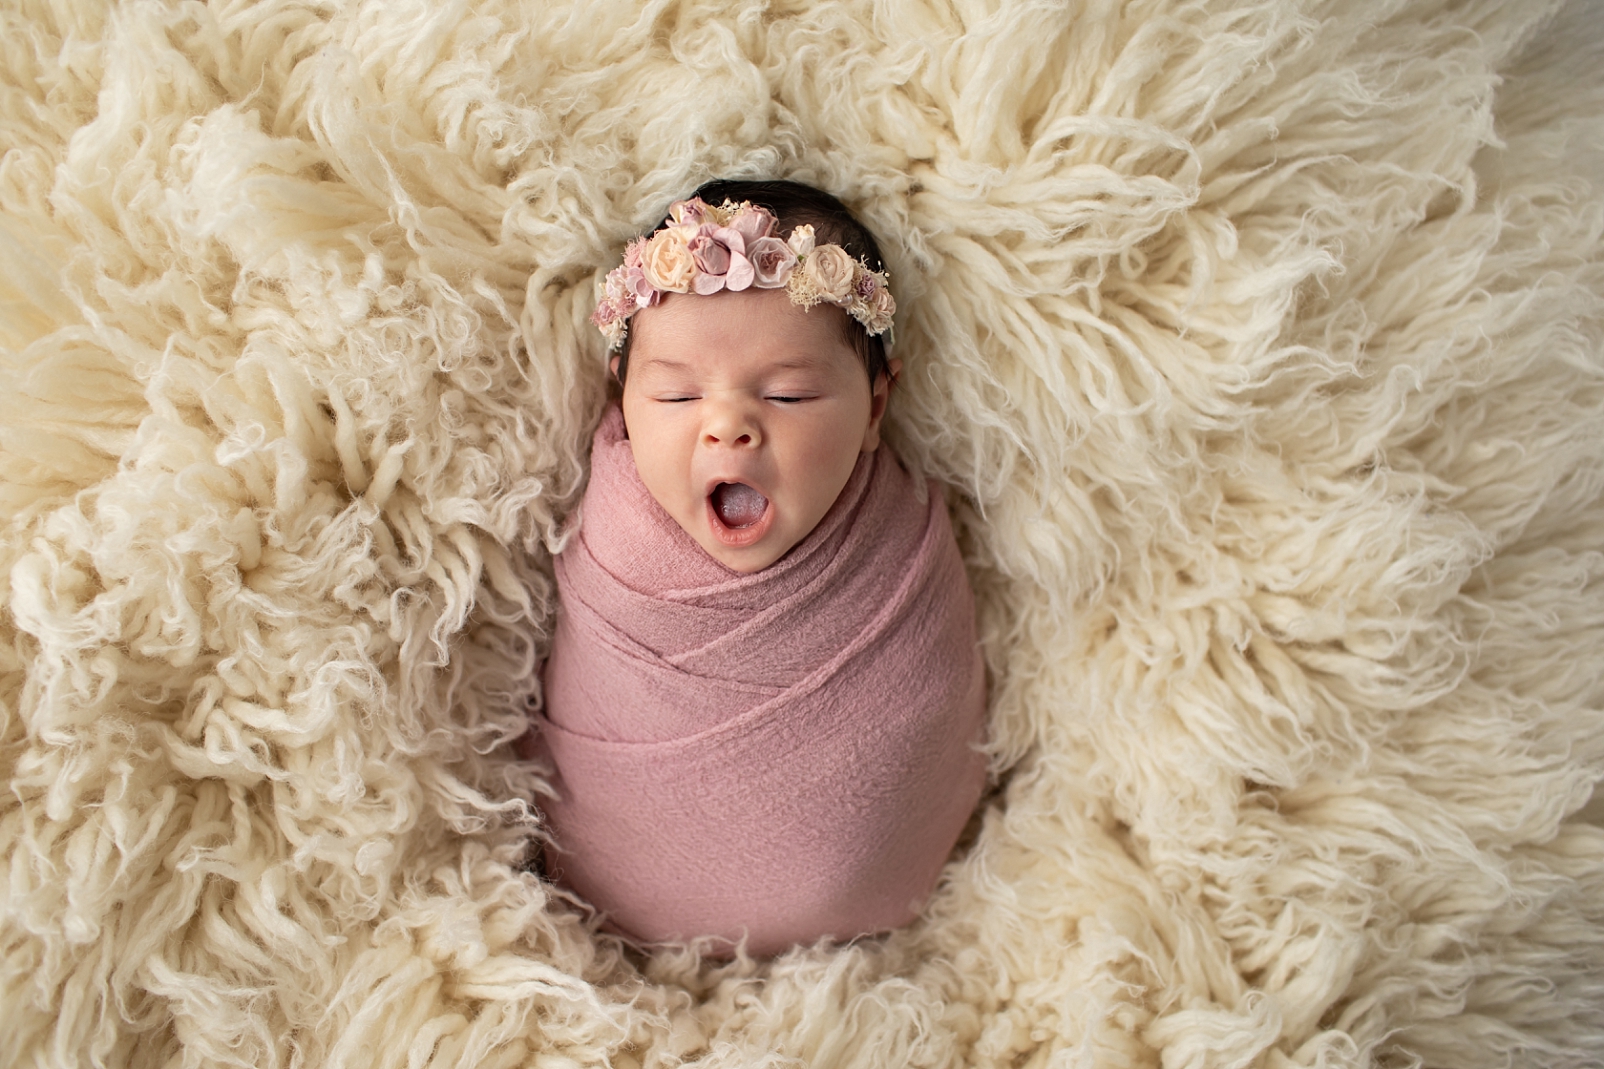 Baby yawns in a mauve wrap and floral headband on a flokati rug